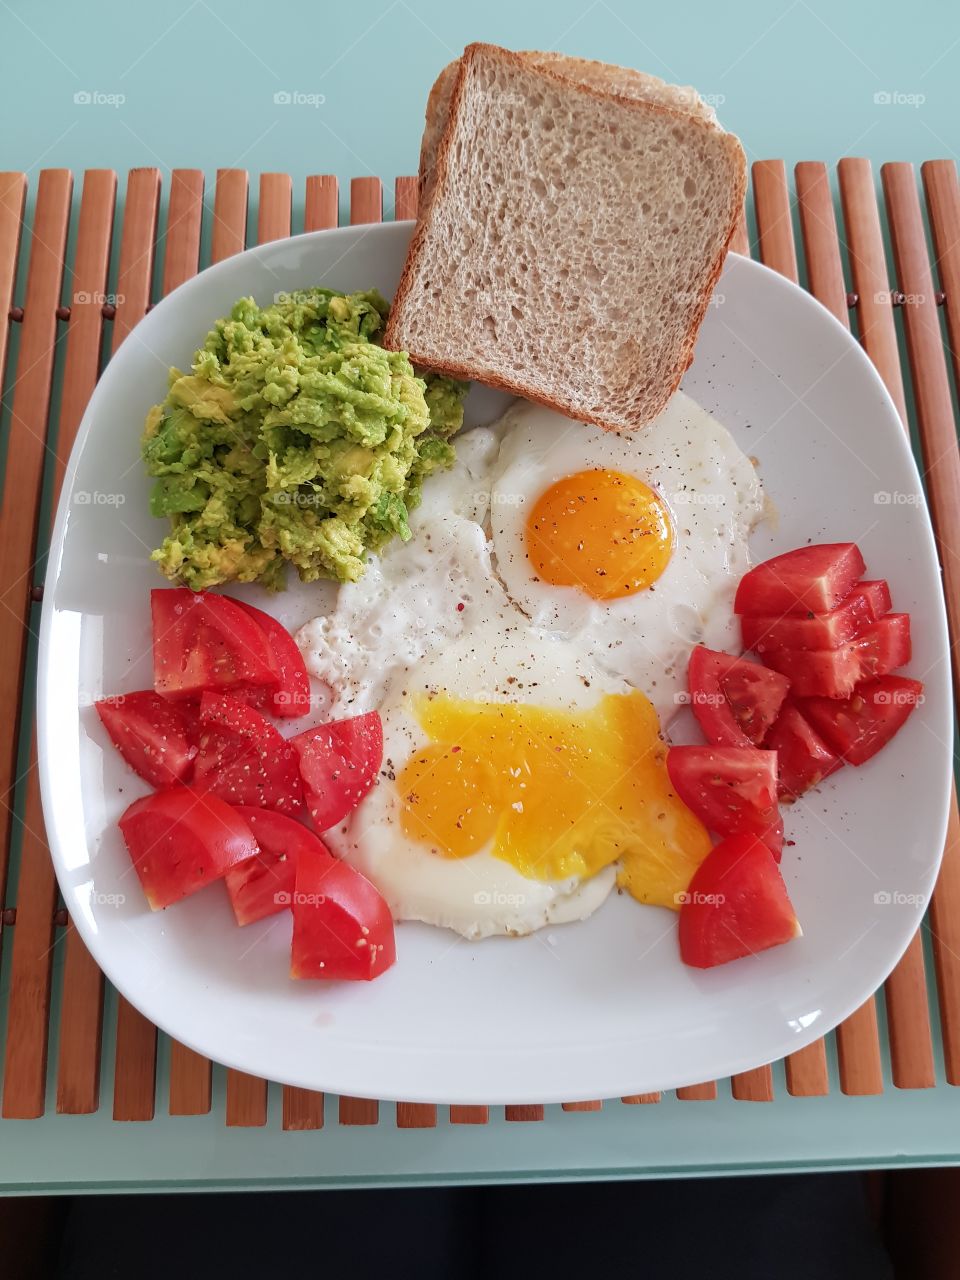 guacamole fried eggs and tomatoes